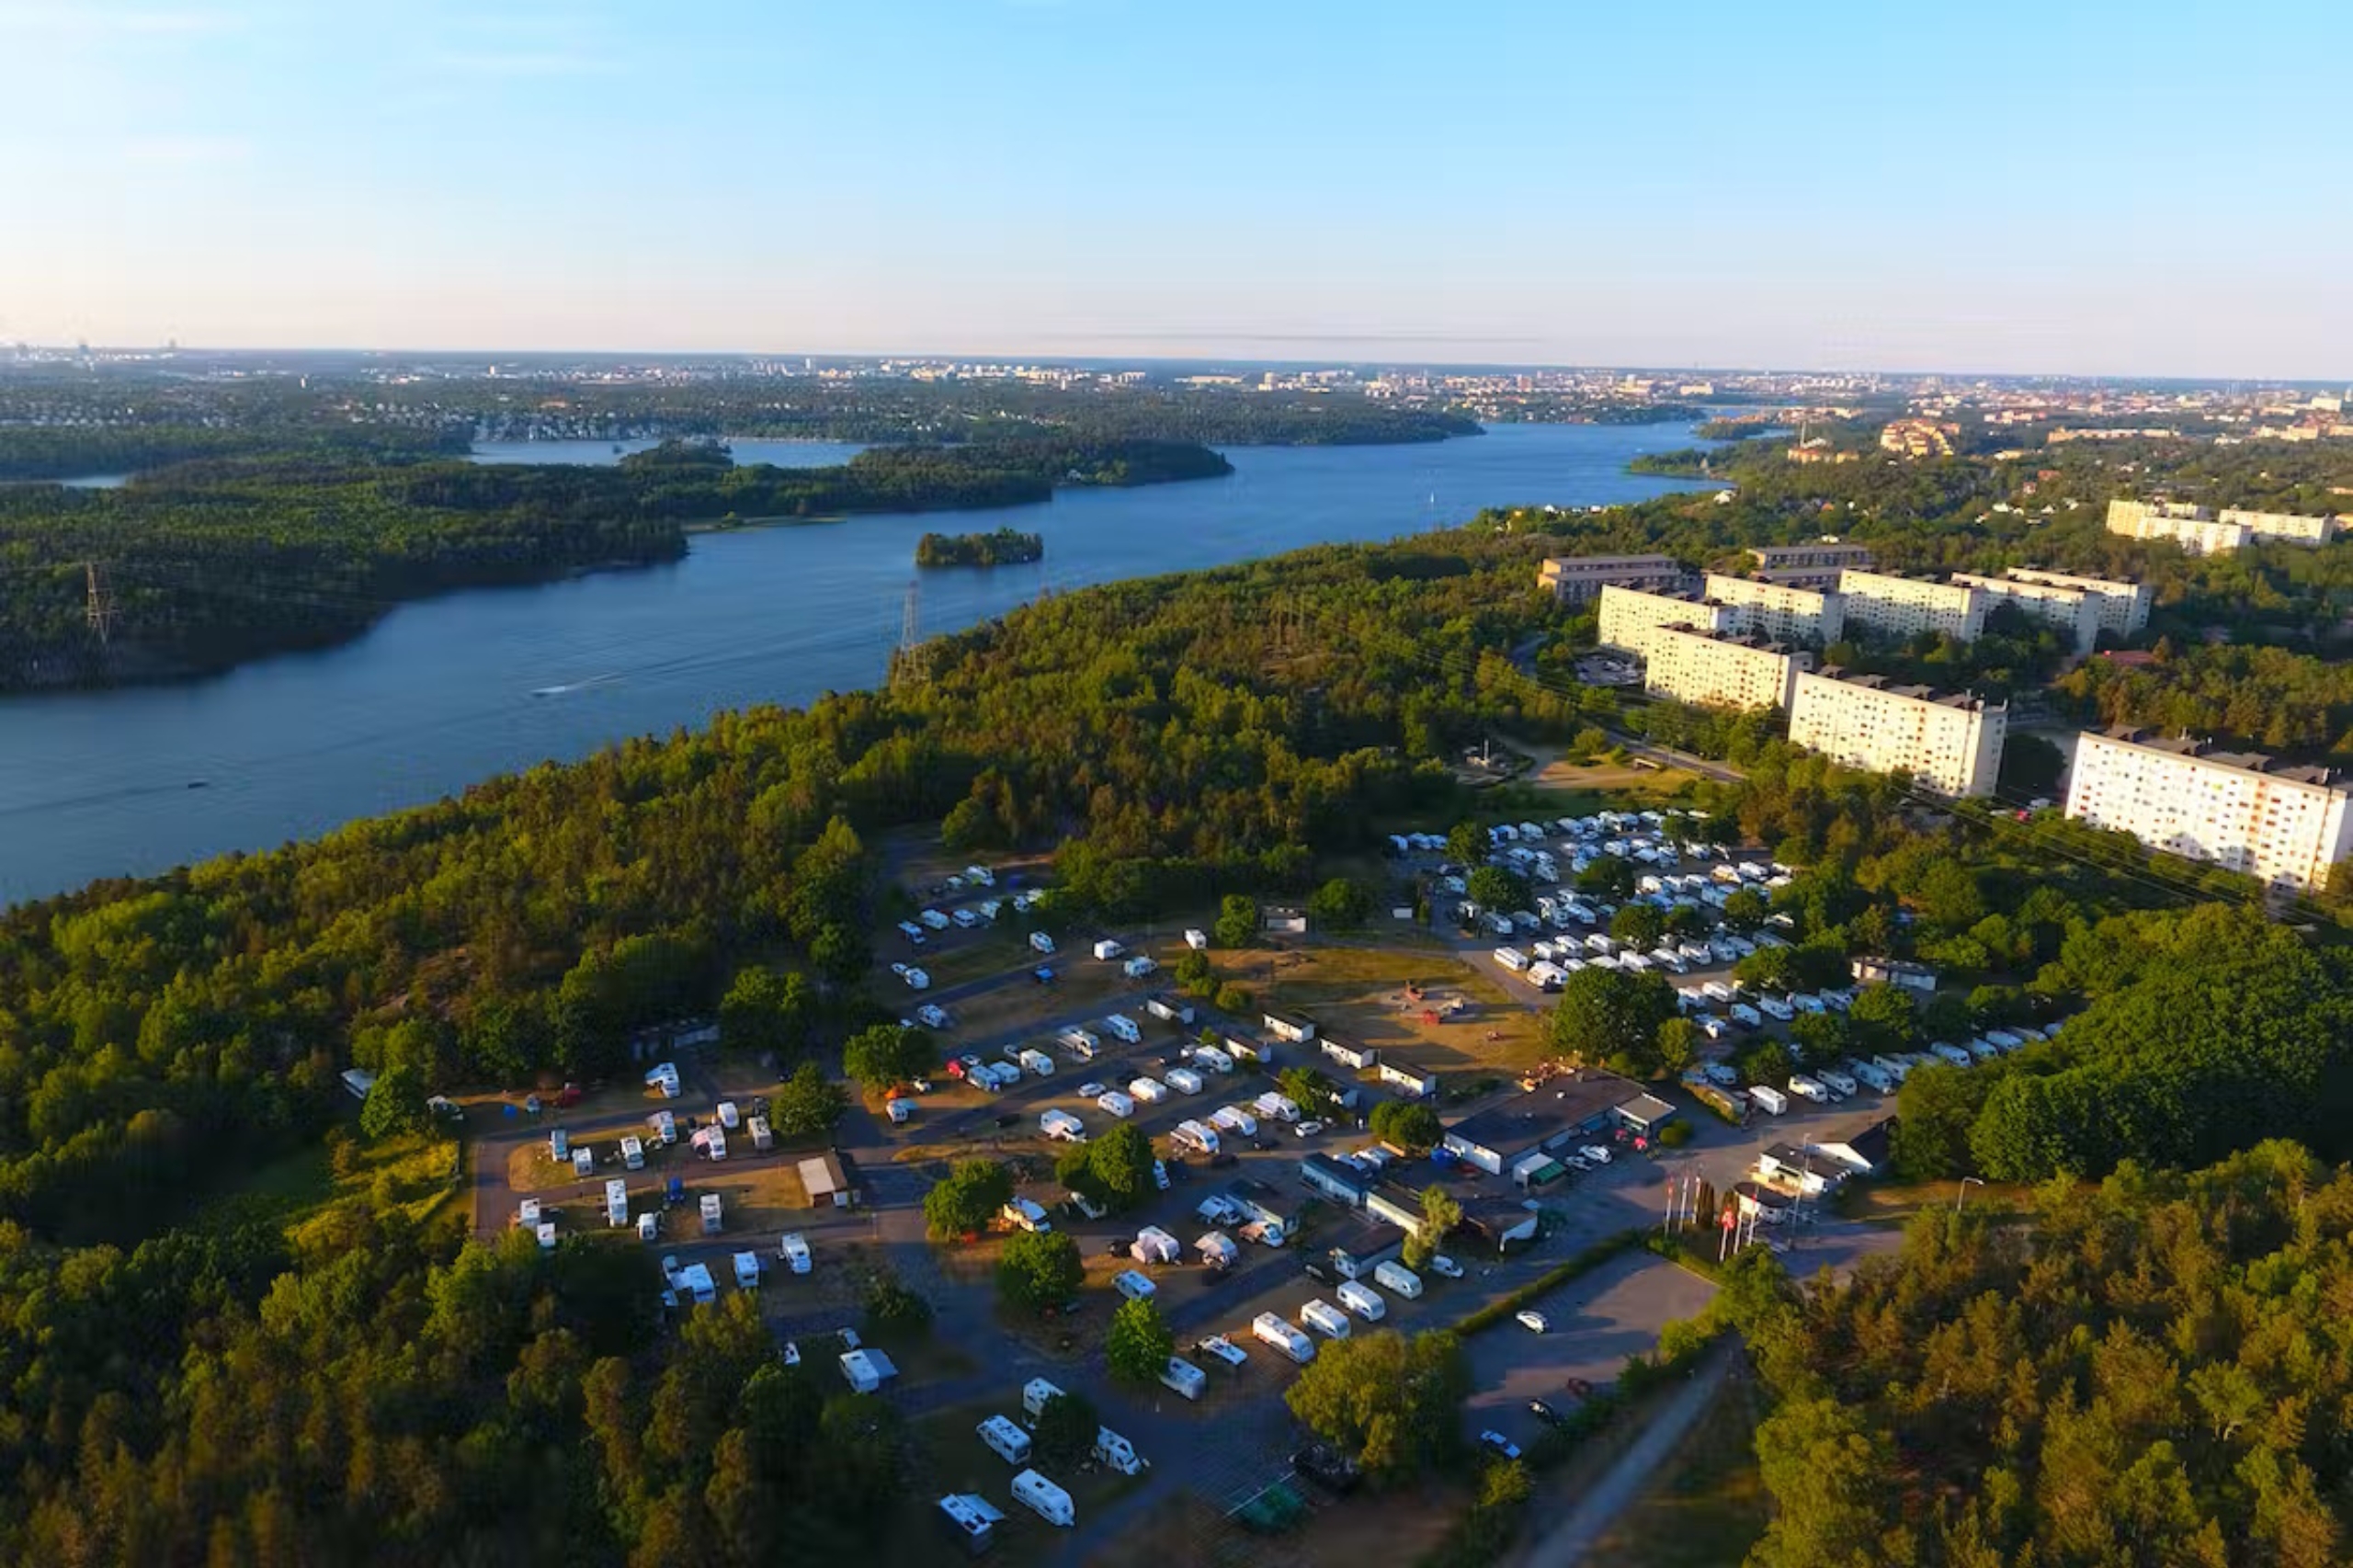 Bredäng Camping is both scenic and close to the big city